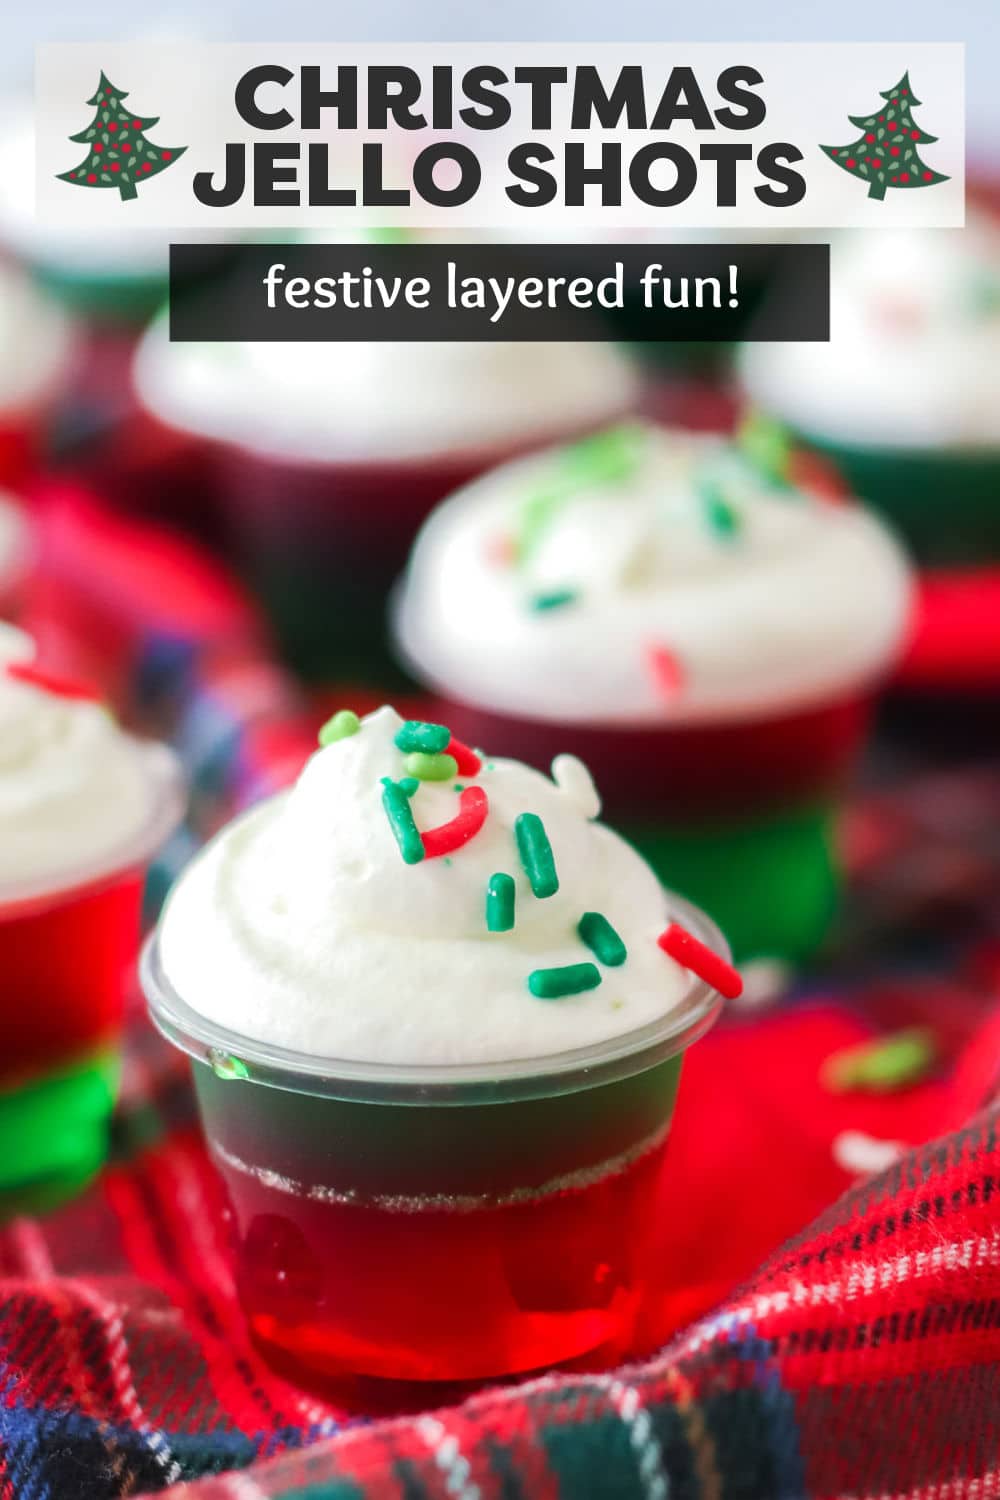 These Christmas Jello Shots are made with simple ingredients and will put the holiday spirit into your holiday season. Red and green jello are layered together then topped with whipped cream and festive sprinkles. Perfect for holiday parties! | www.persnicketyplates.com